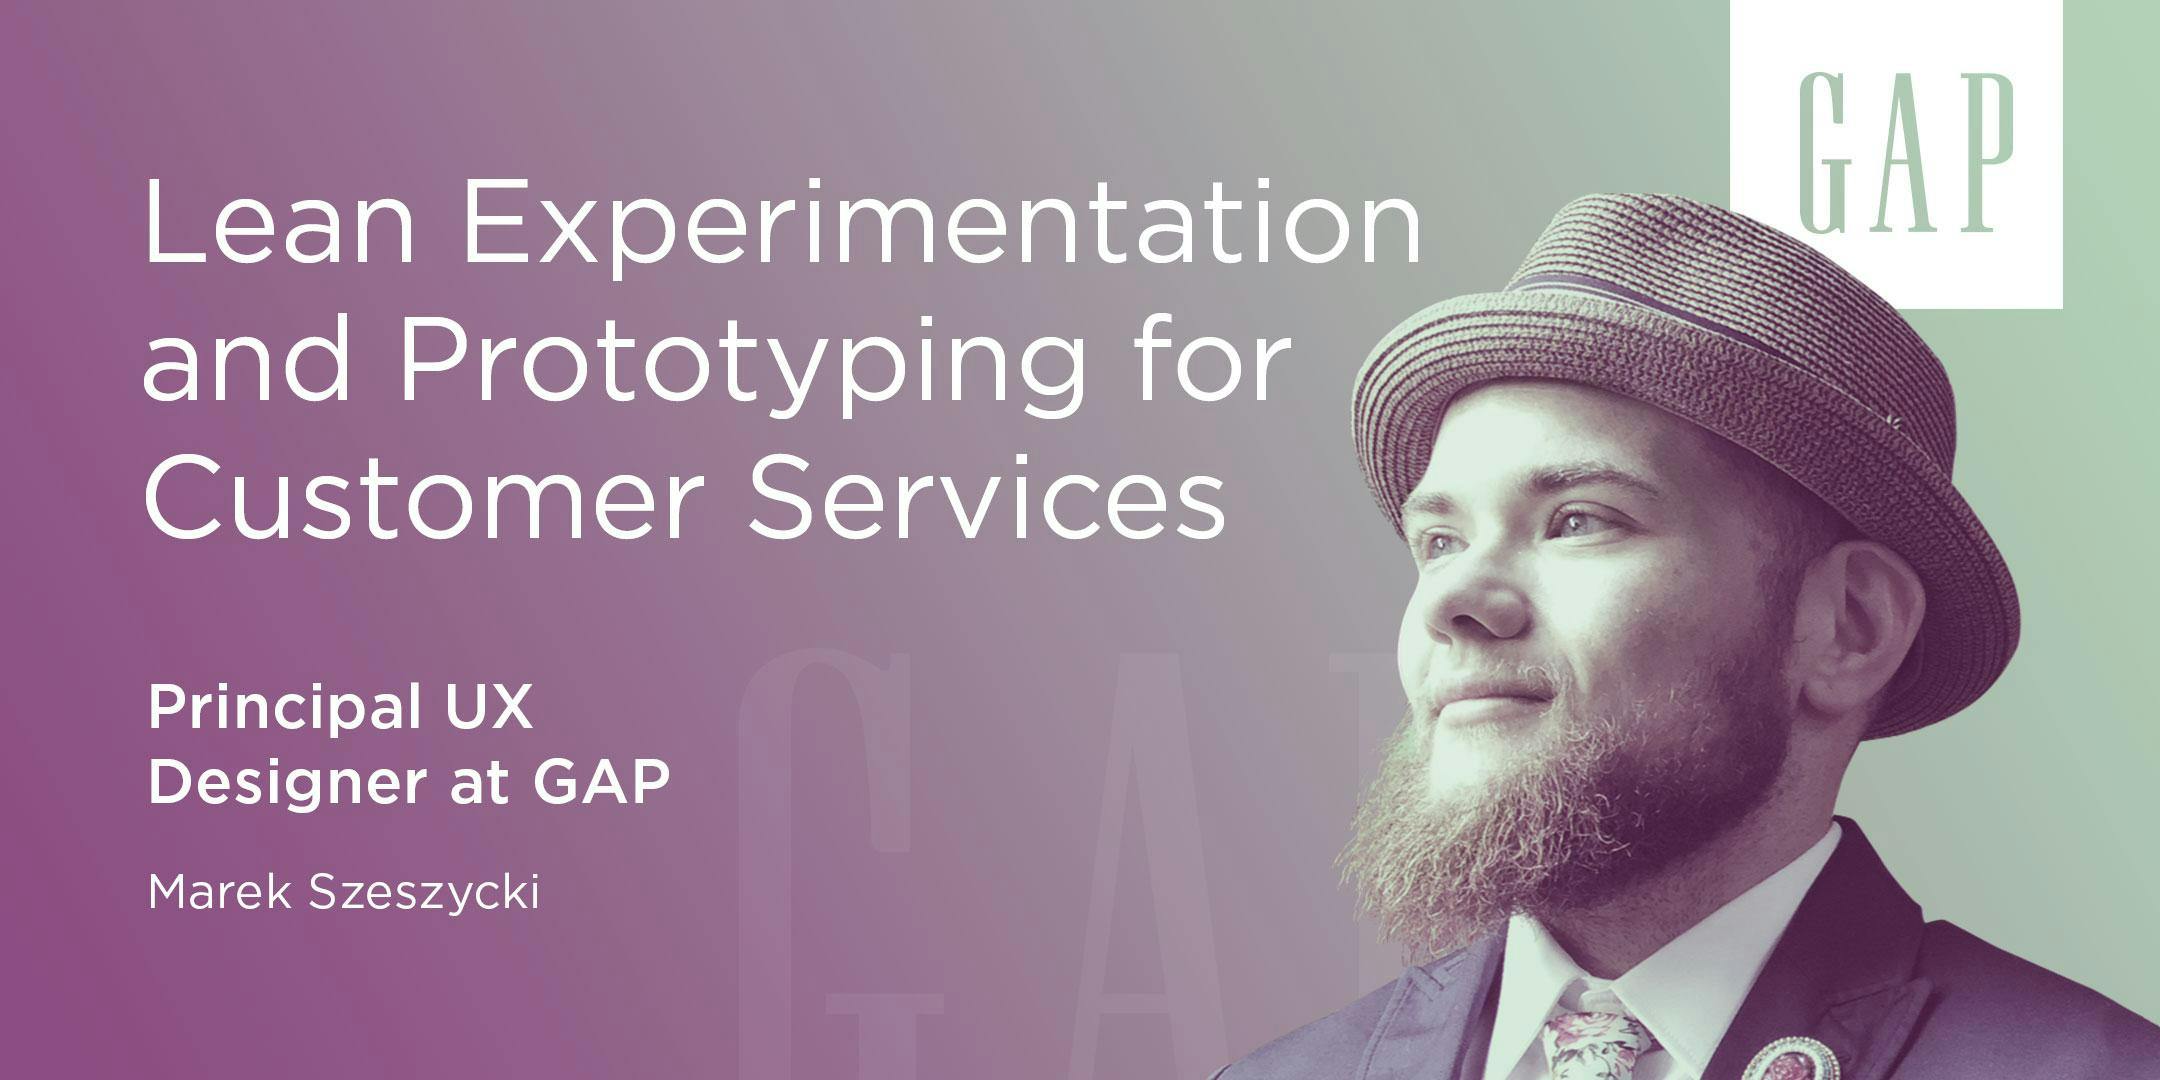 Adding Lean Experimentation to your UX: Lessons from Gap Inc. (Only 9 seats left)